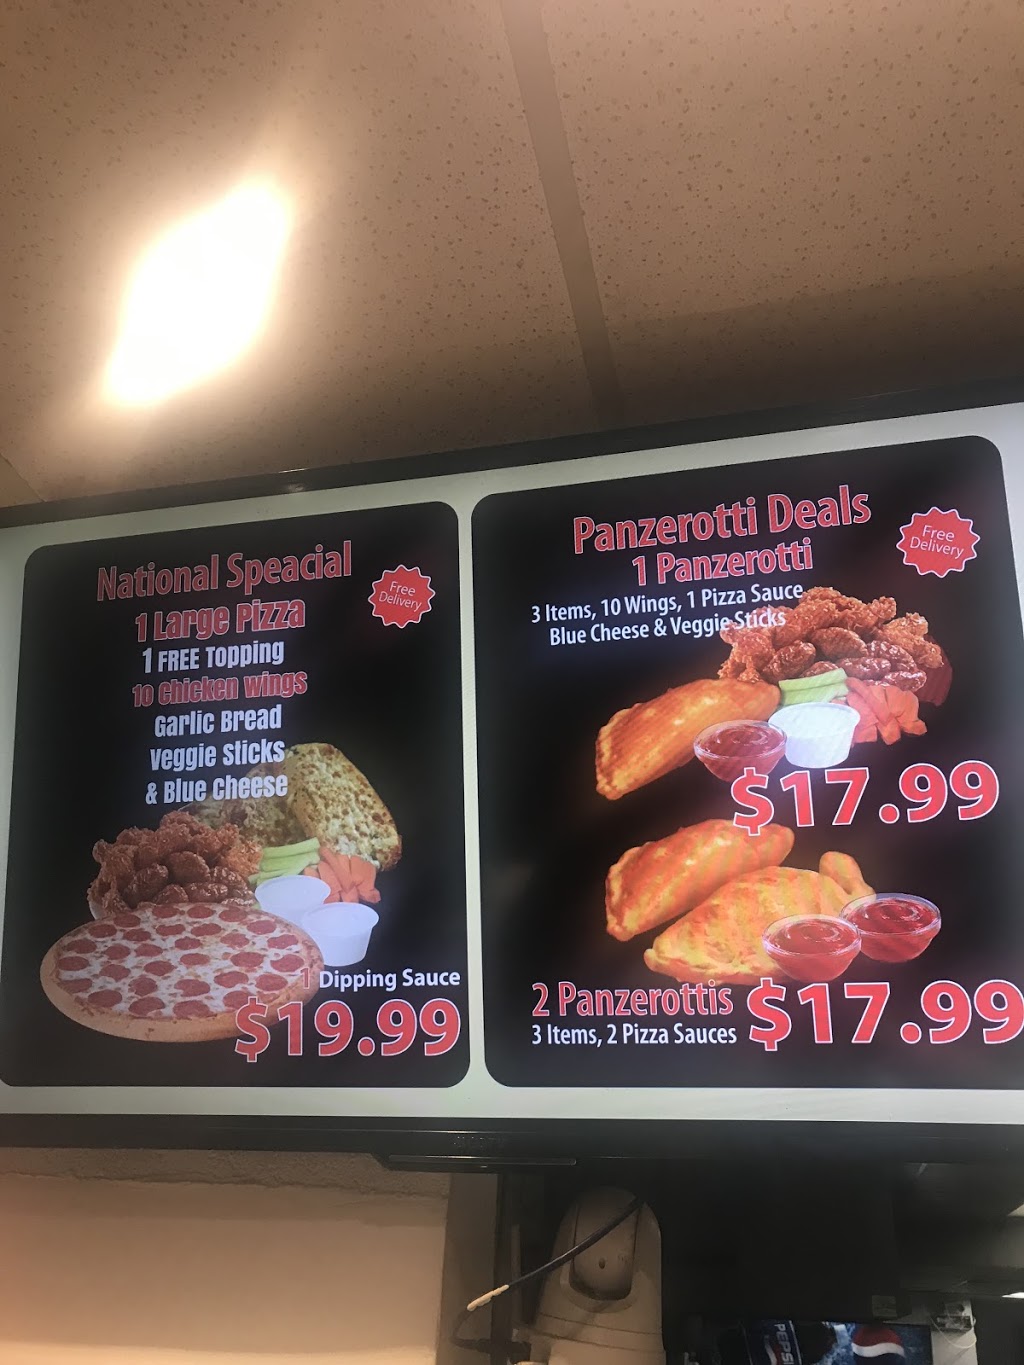 National Pizza & Wings | 870 Upper James St, Hamilton, ON L9C 7N1, Canada | Phone: (905) 575-4500